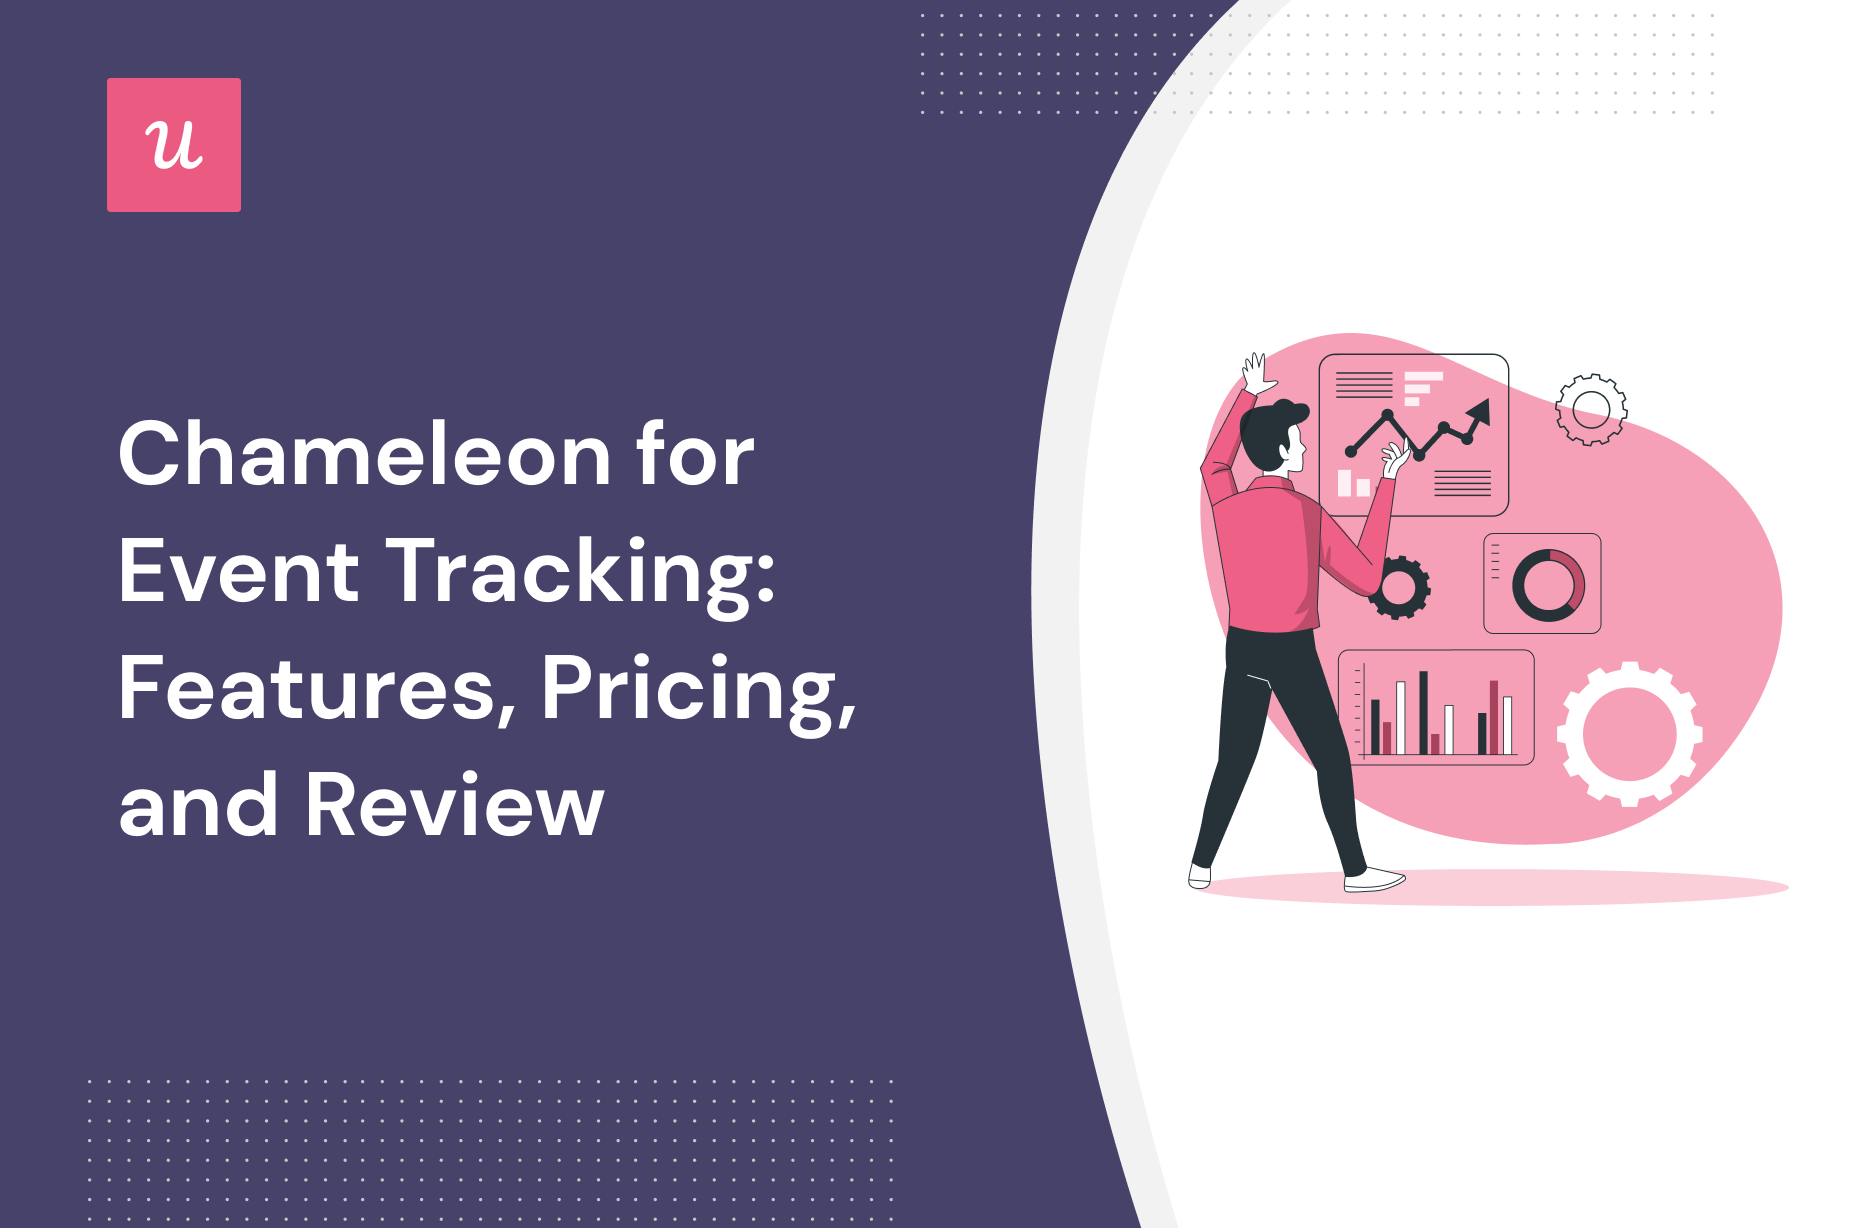 Chameleon for Event Tracking: Features, Pricing, and Review